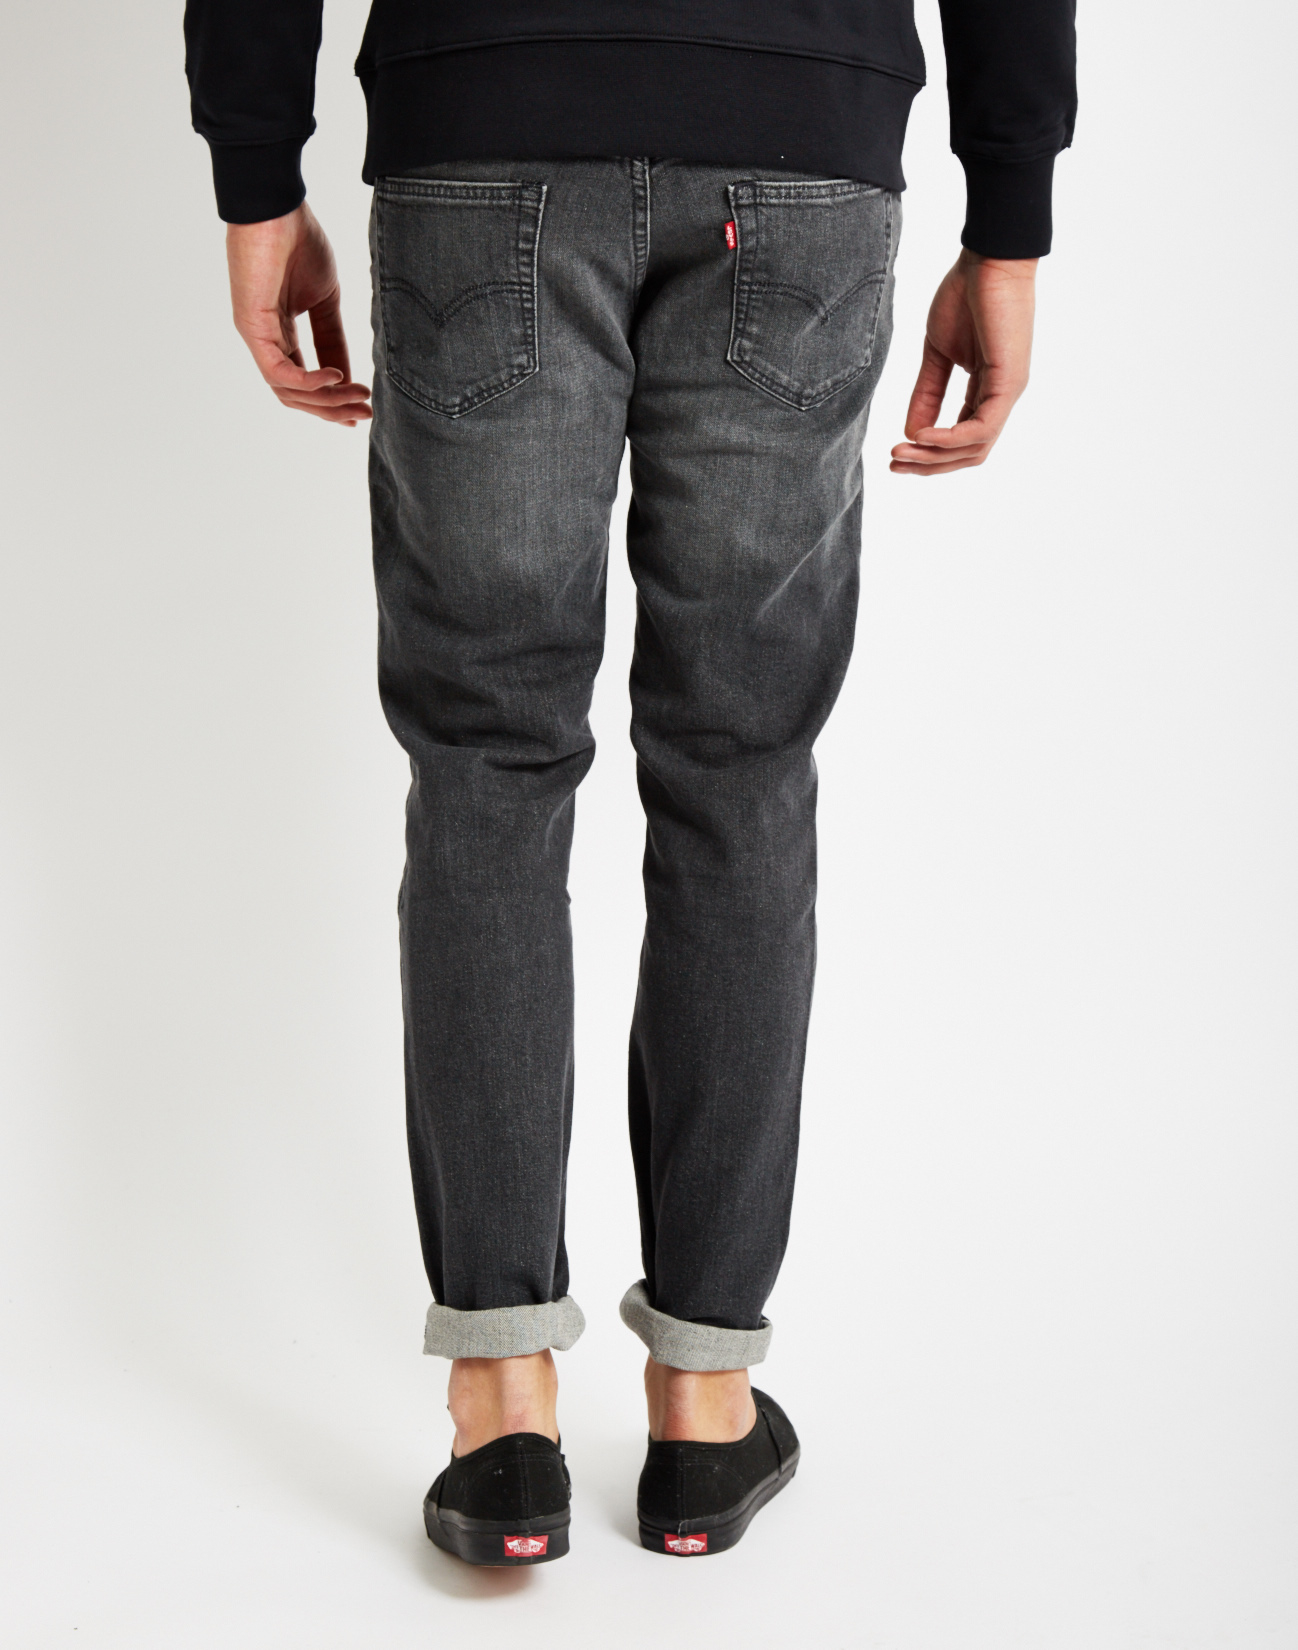 Lyst - Levi'S Jeans 511 Slim Tapered Fit Magnus Stretch Washed Out ...